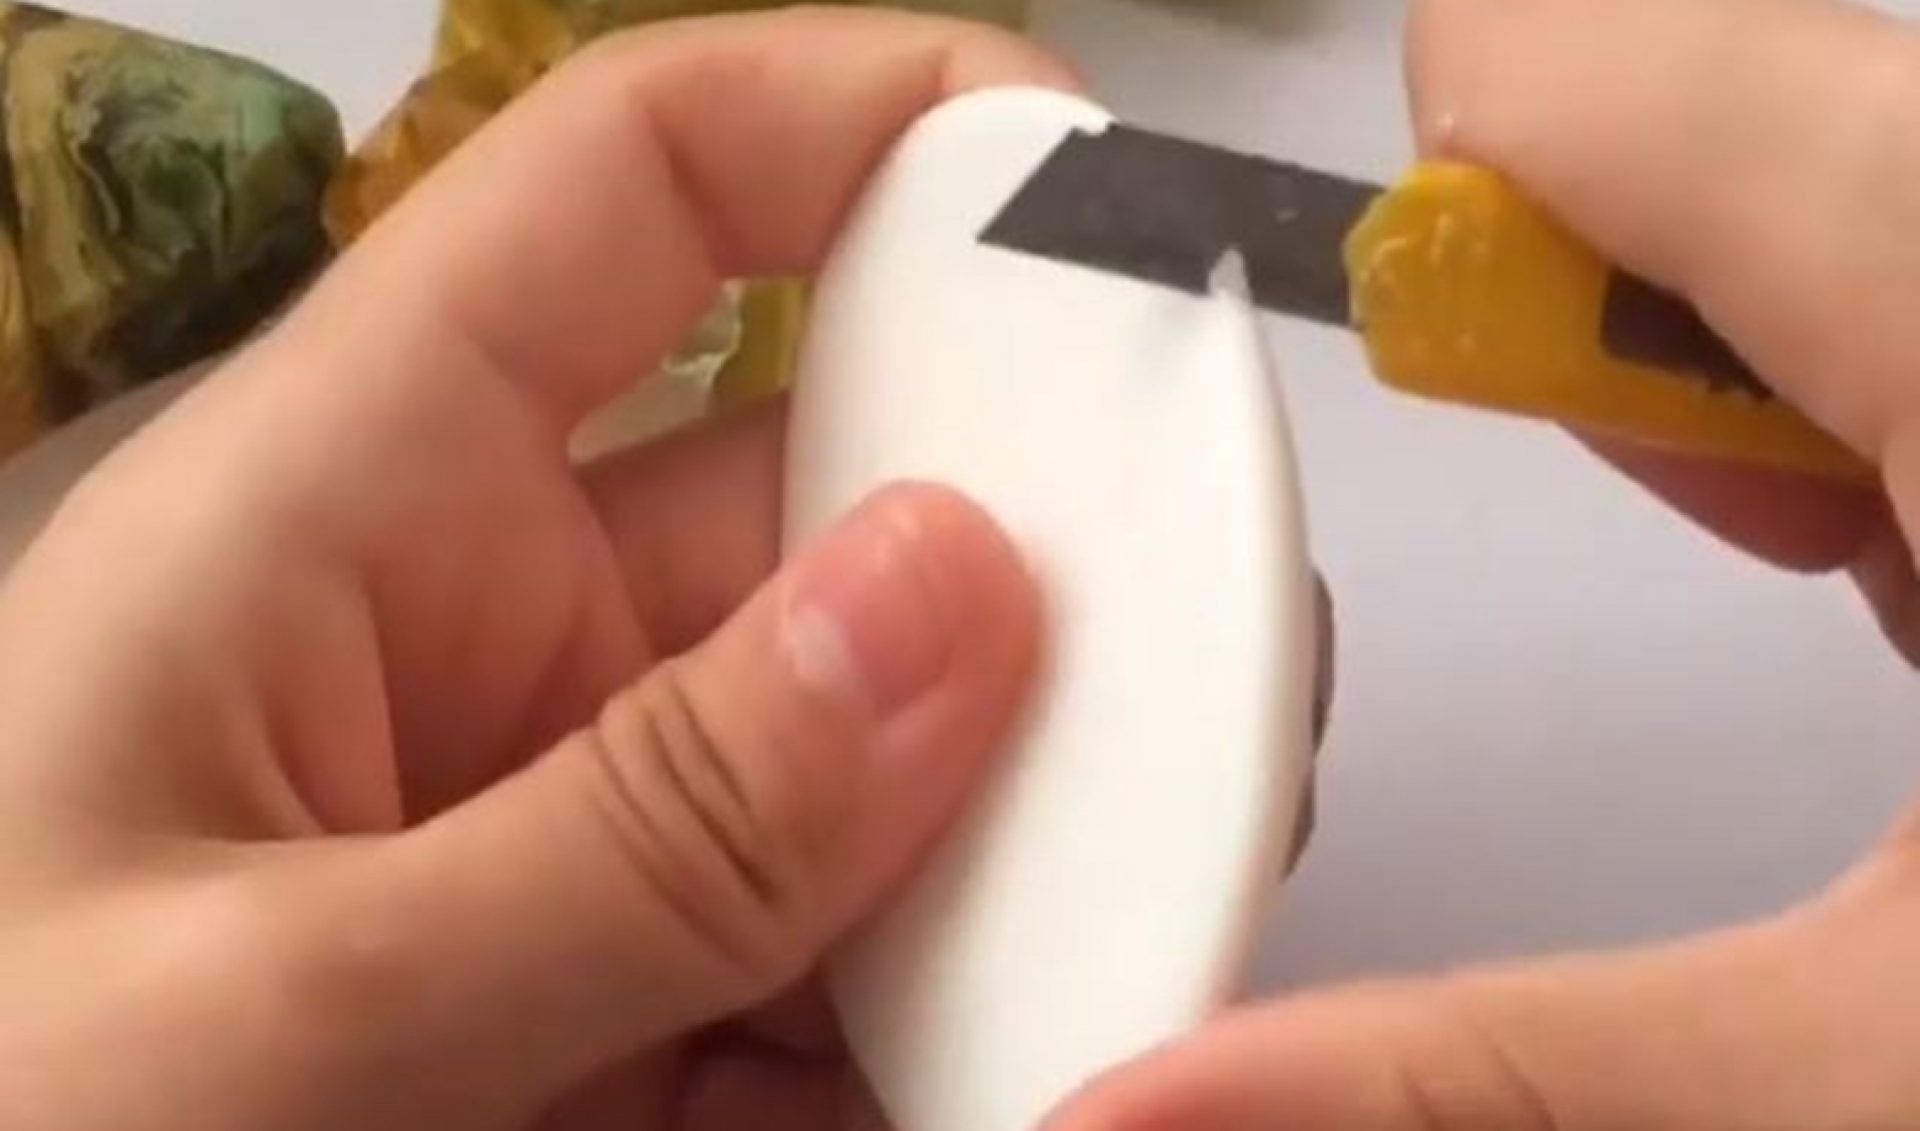 Could Soap-Cutting Videos Be The Successor To YouTube’s Massive Slime Craze?